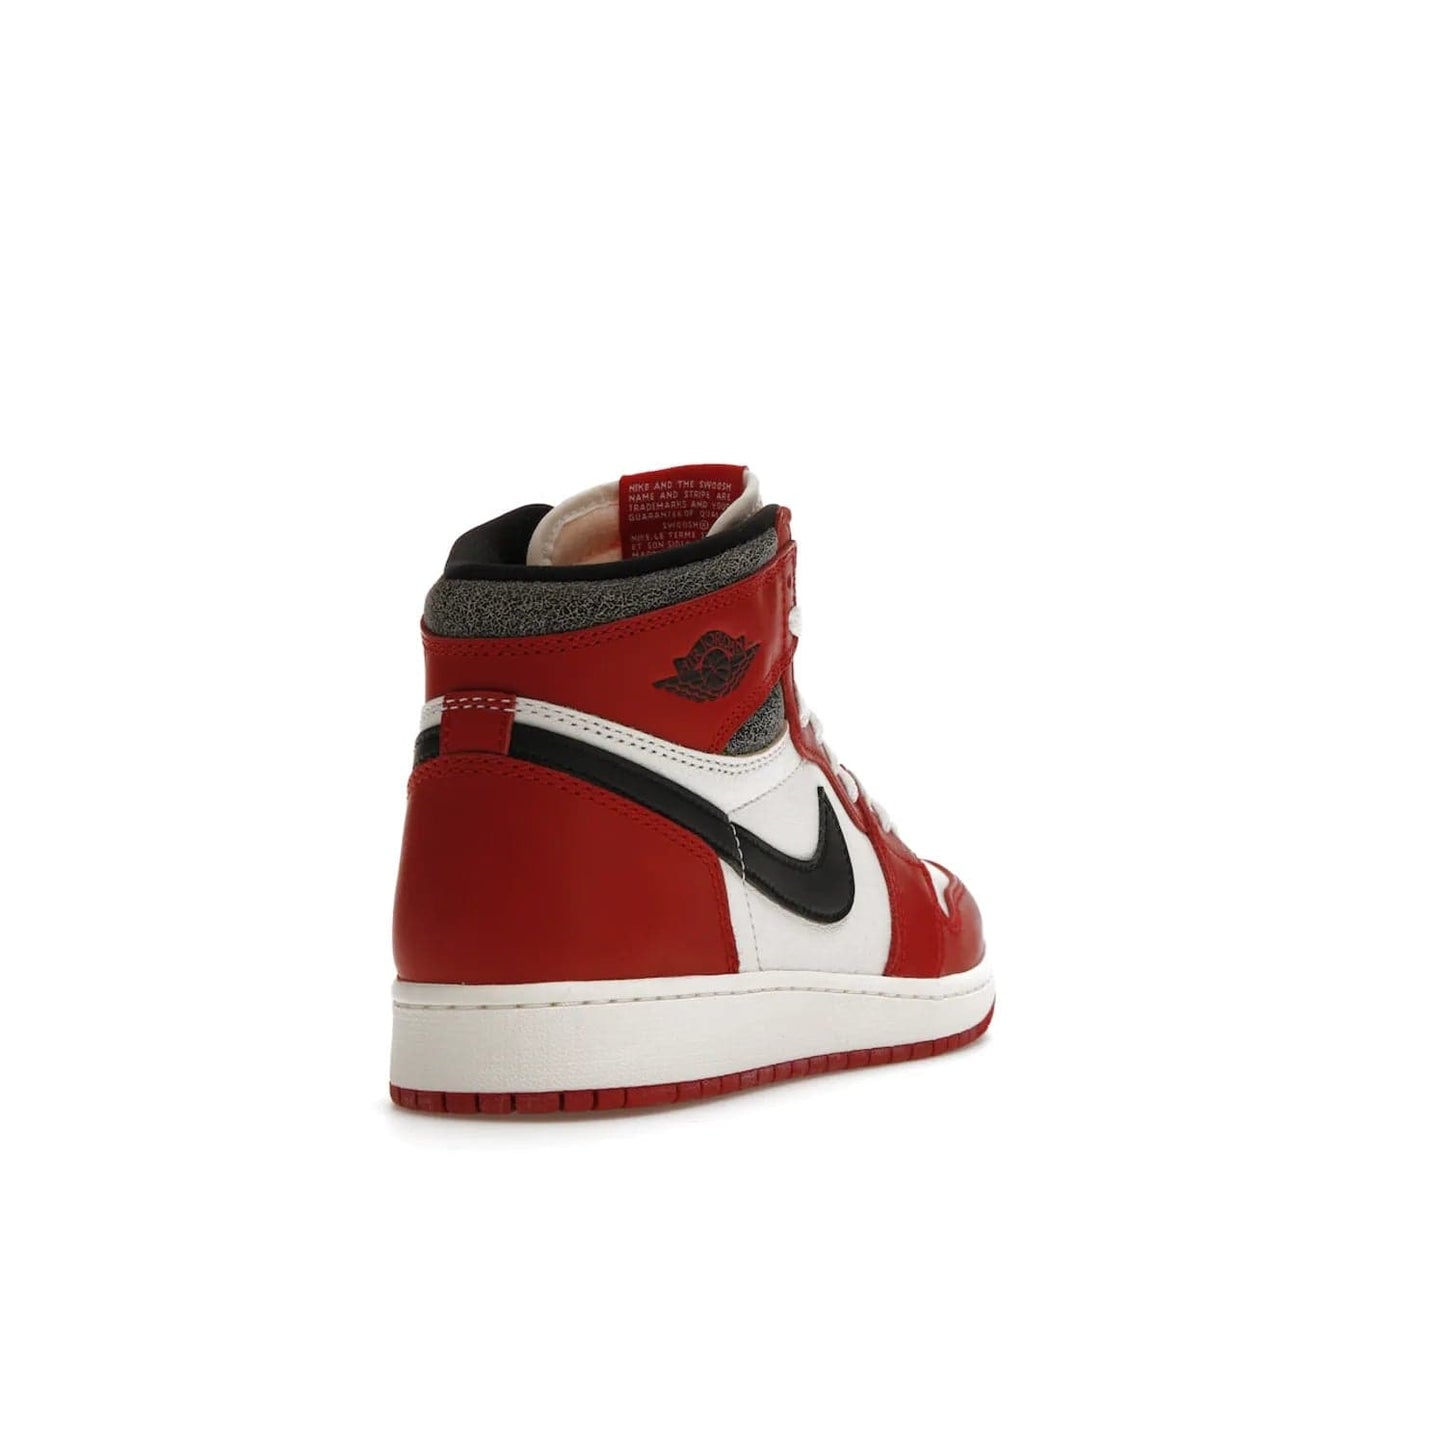 Jordan 1 Retro High OG Chicago Lost and Found (GS) - Image 31 - Only at www.BallersClubKickz.com - Grab the Air Jordan 1 Retro High OG Chicago Reimagined GS, presenting in classic 1985 silhouette. Varsity Red, Black, Muslin and Sail hues, featuring Nike Air branding, Wings on the collars and printed insoles. Don't miss out when it releases 19th Nov 2022.